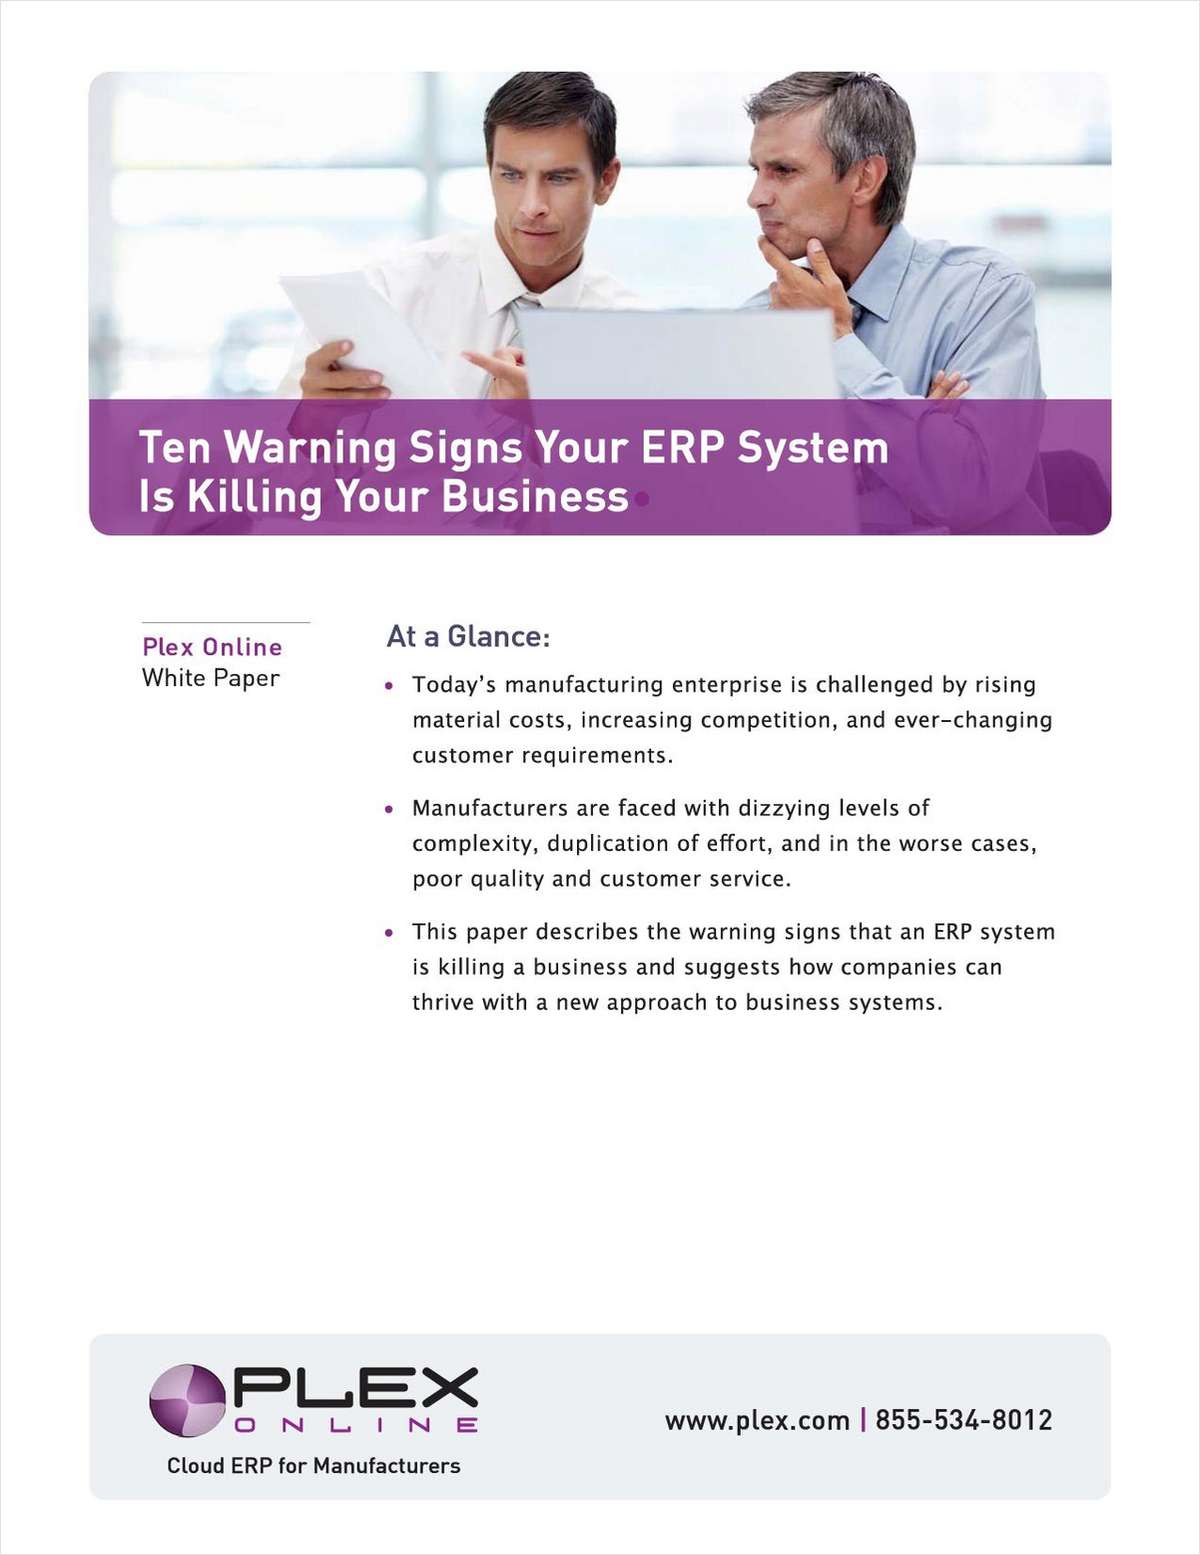 Is Your ERP Killing Your Manufacturing Business? The 10 Warning Signs